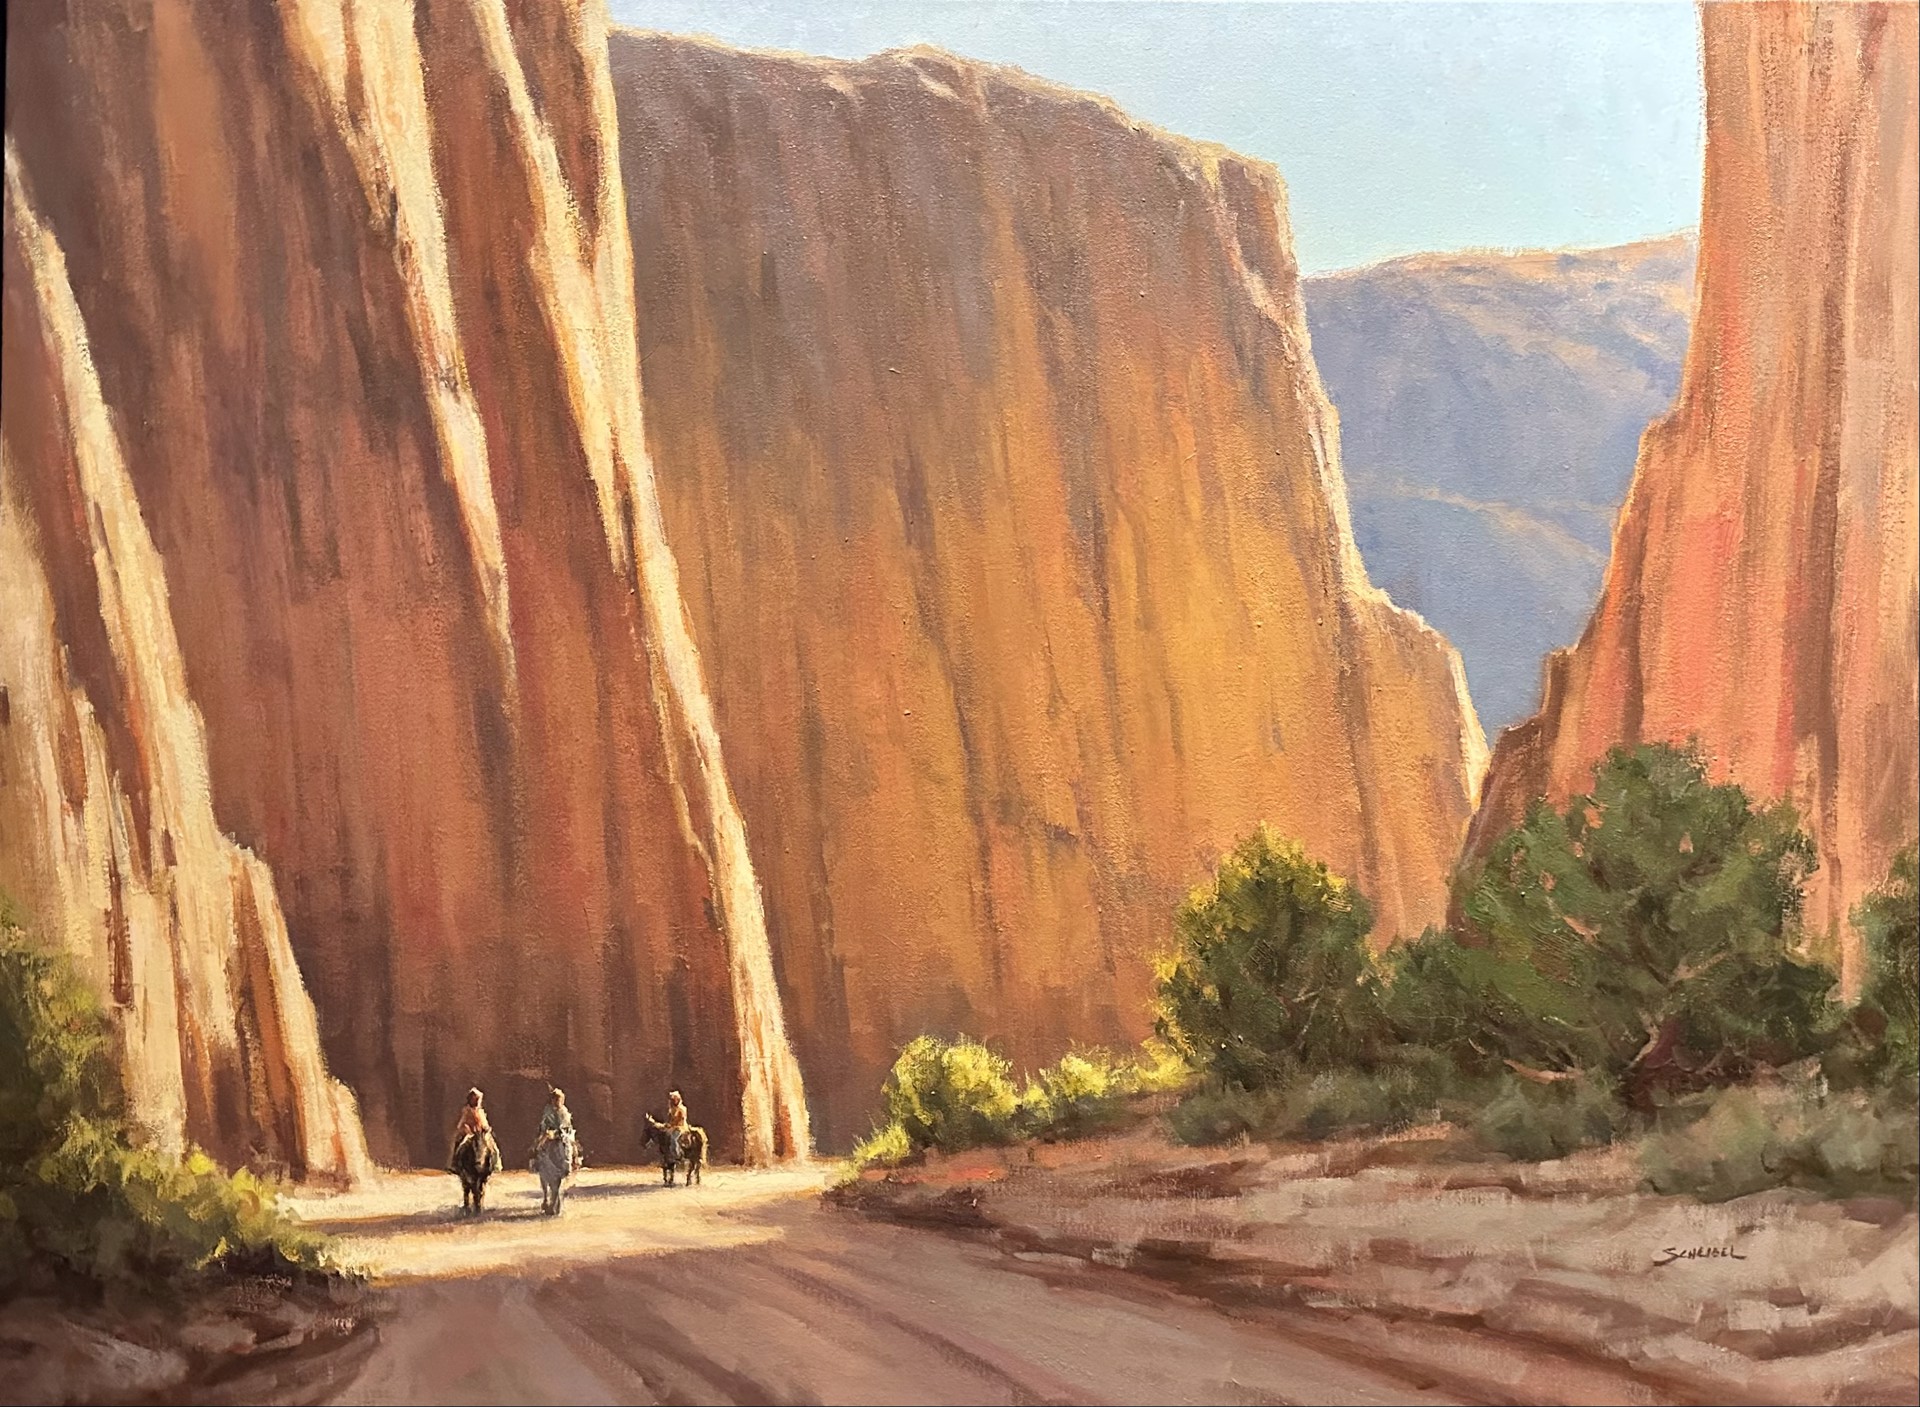 CANYON RIDERS by Greg Scheibel